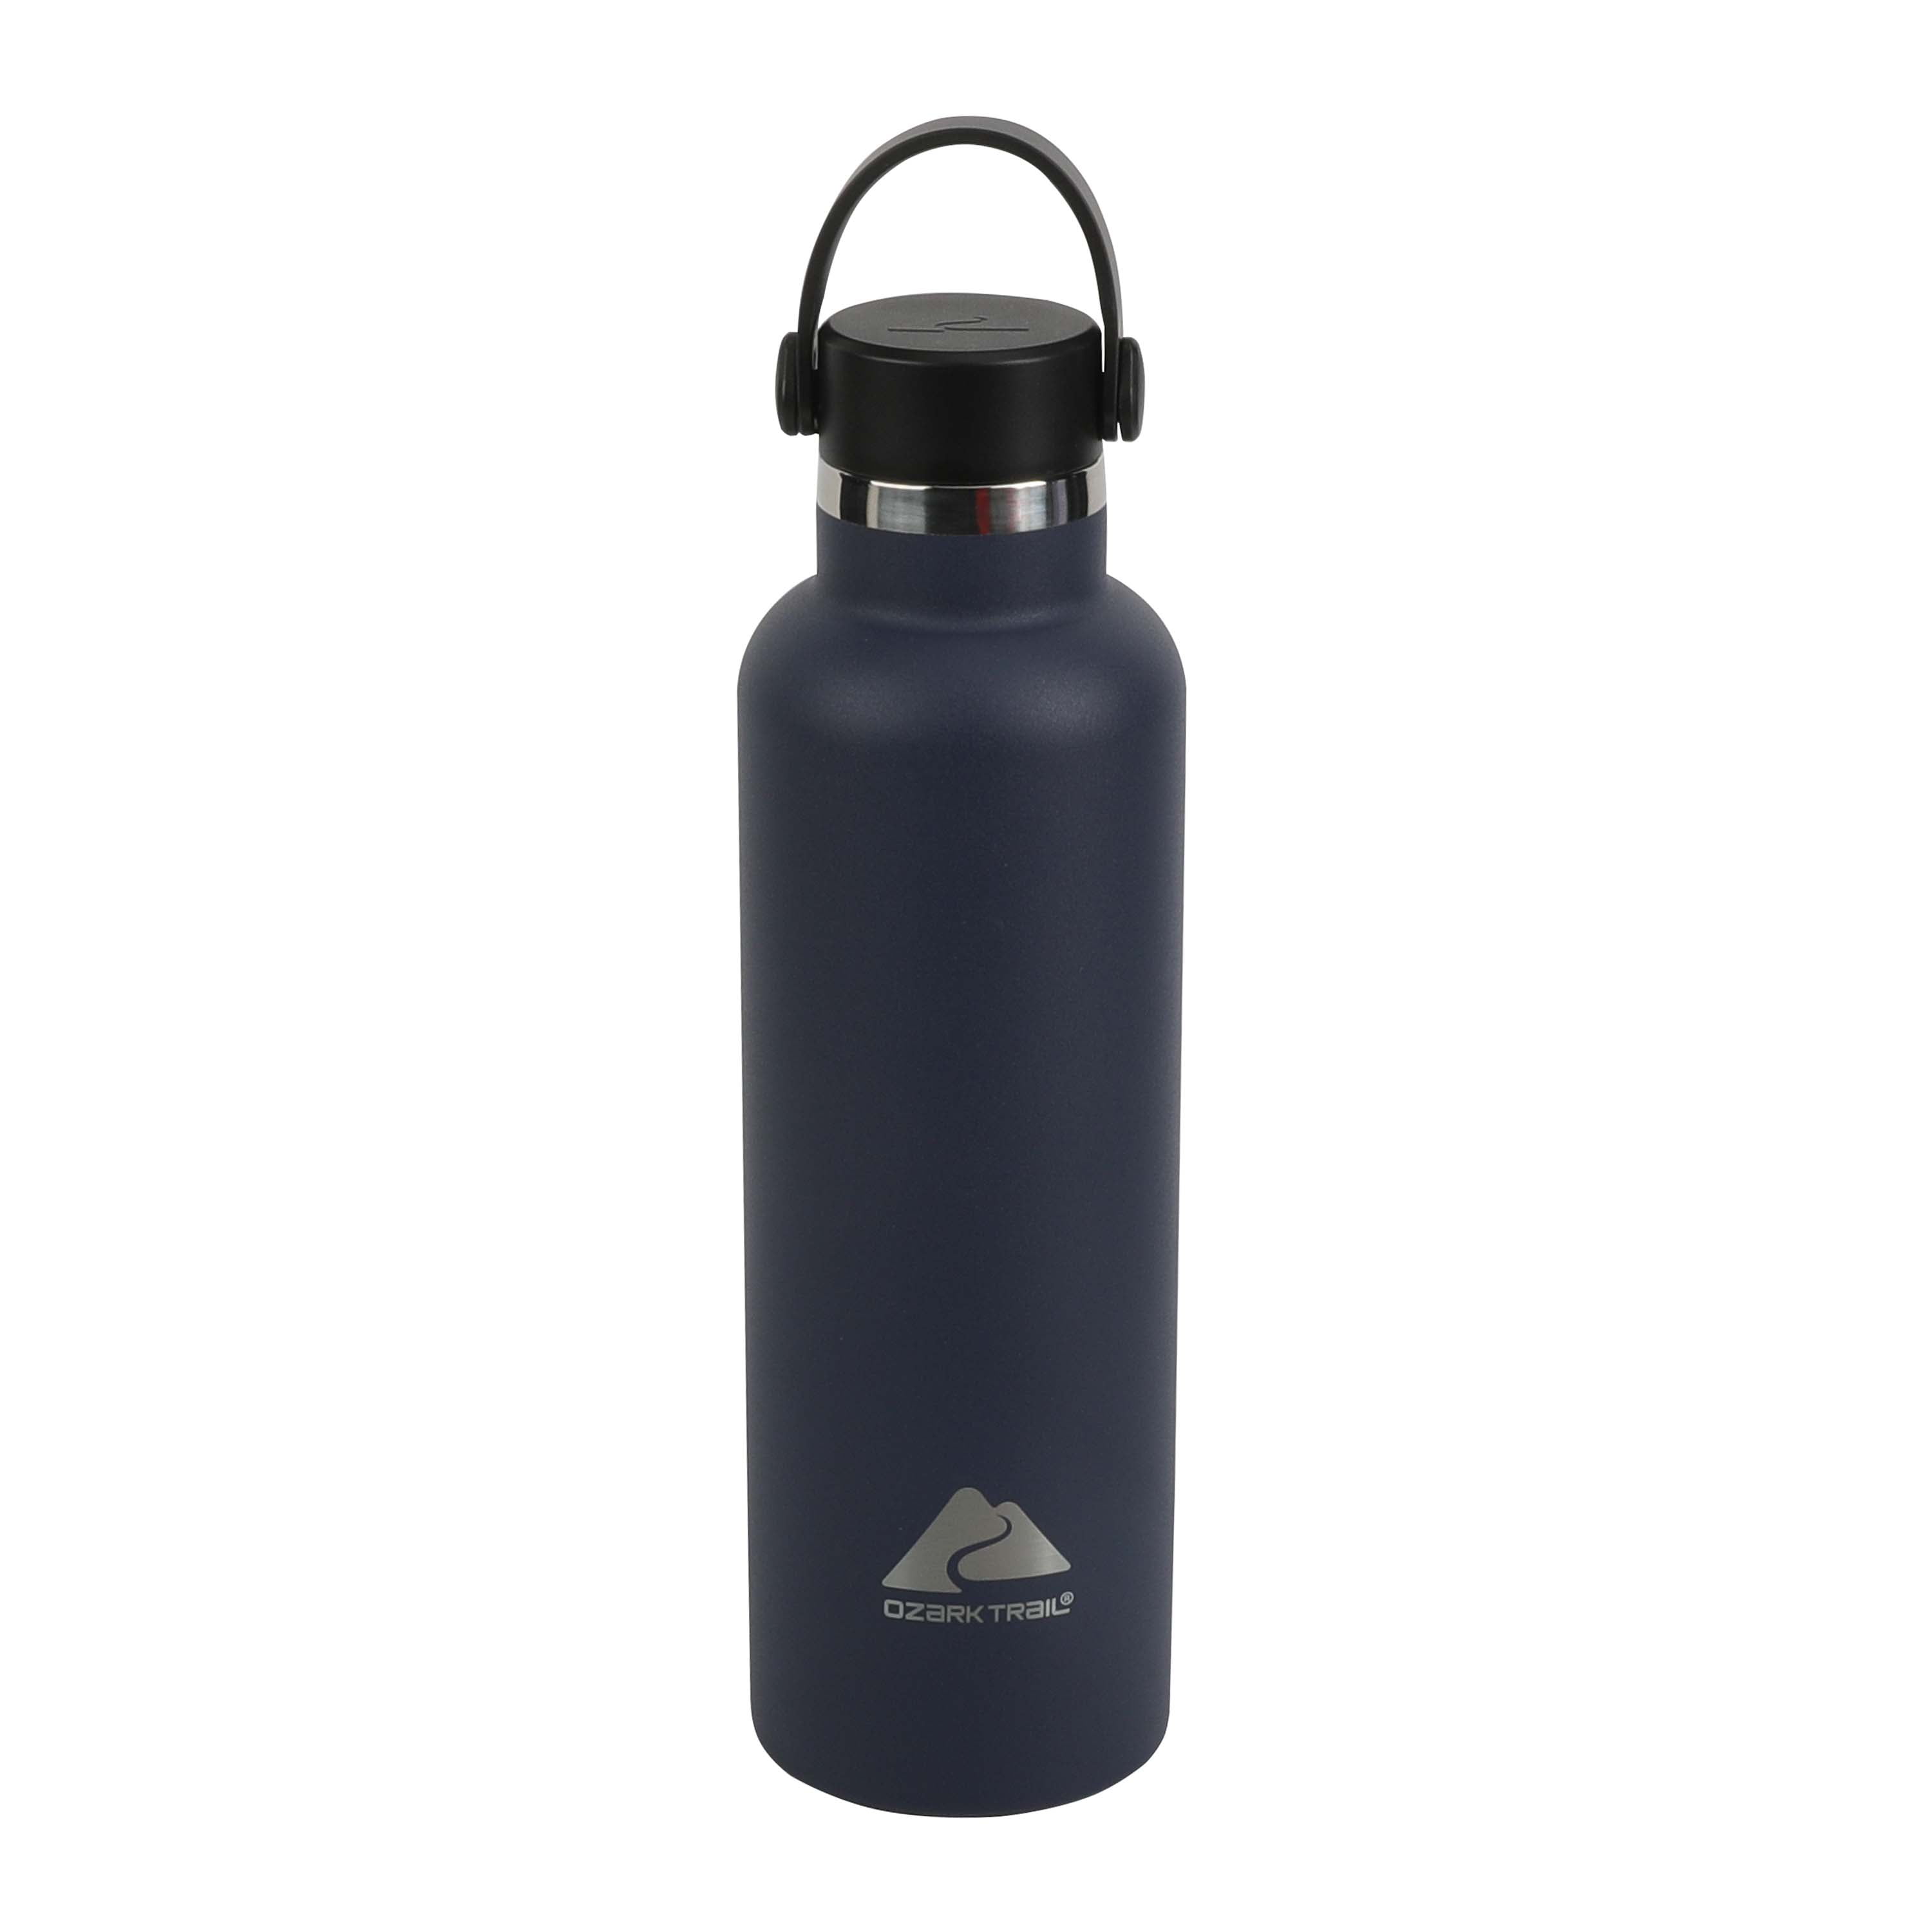 Ozark Trail 24 fl oz Blue Insulated Stainless Steel Water Bottle, Twist Cap with Loop Handle